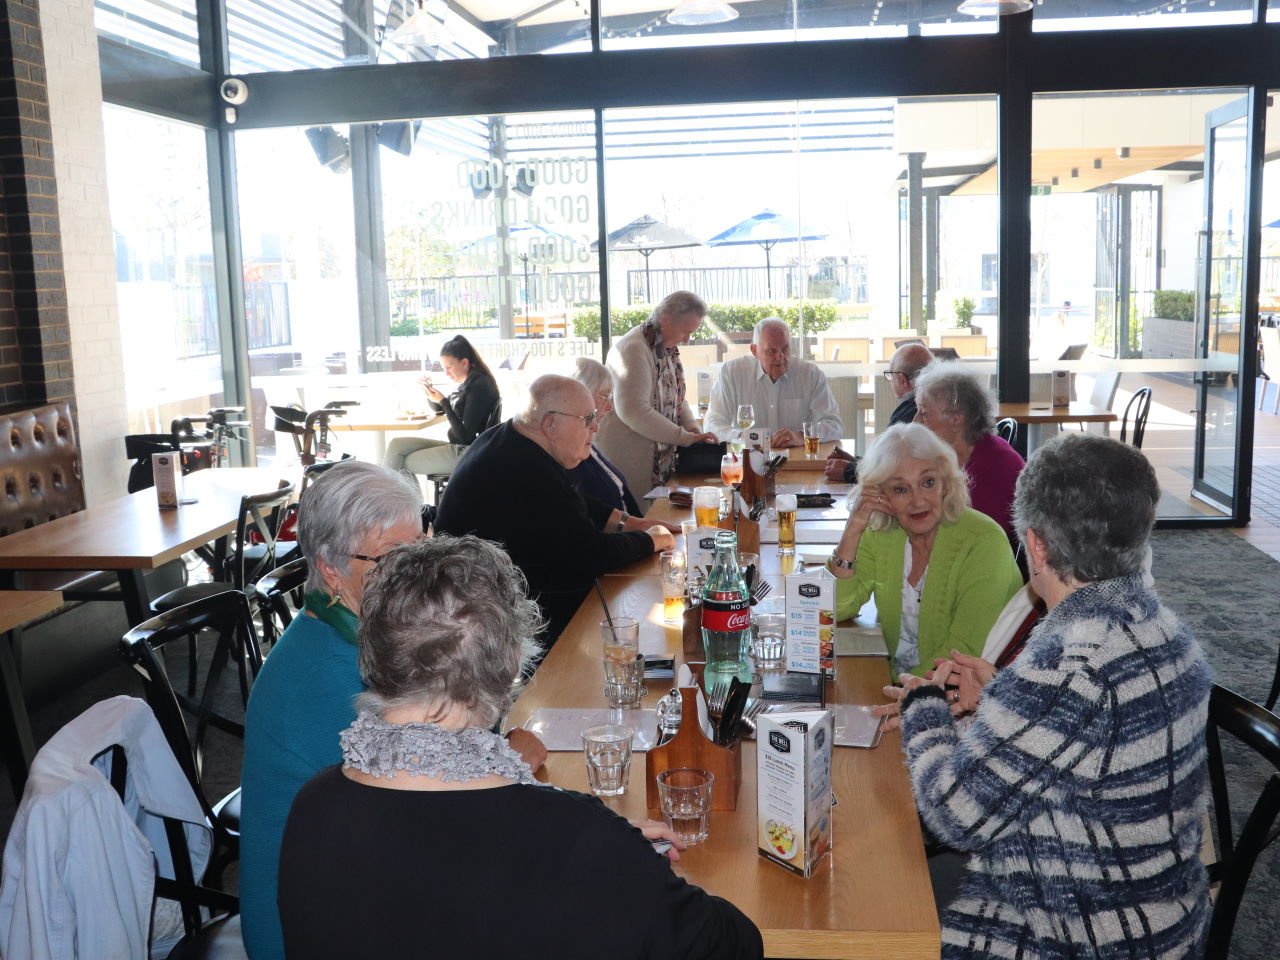 8th of July 2019
Regular Monday outing - Lunch at the Well in Wellard